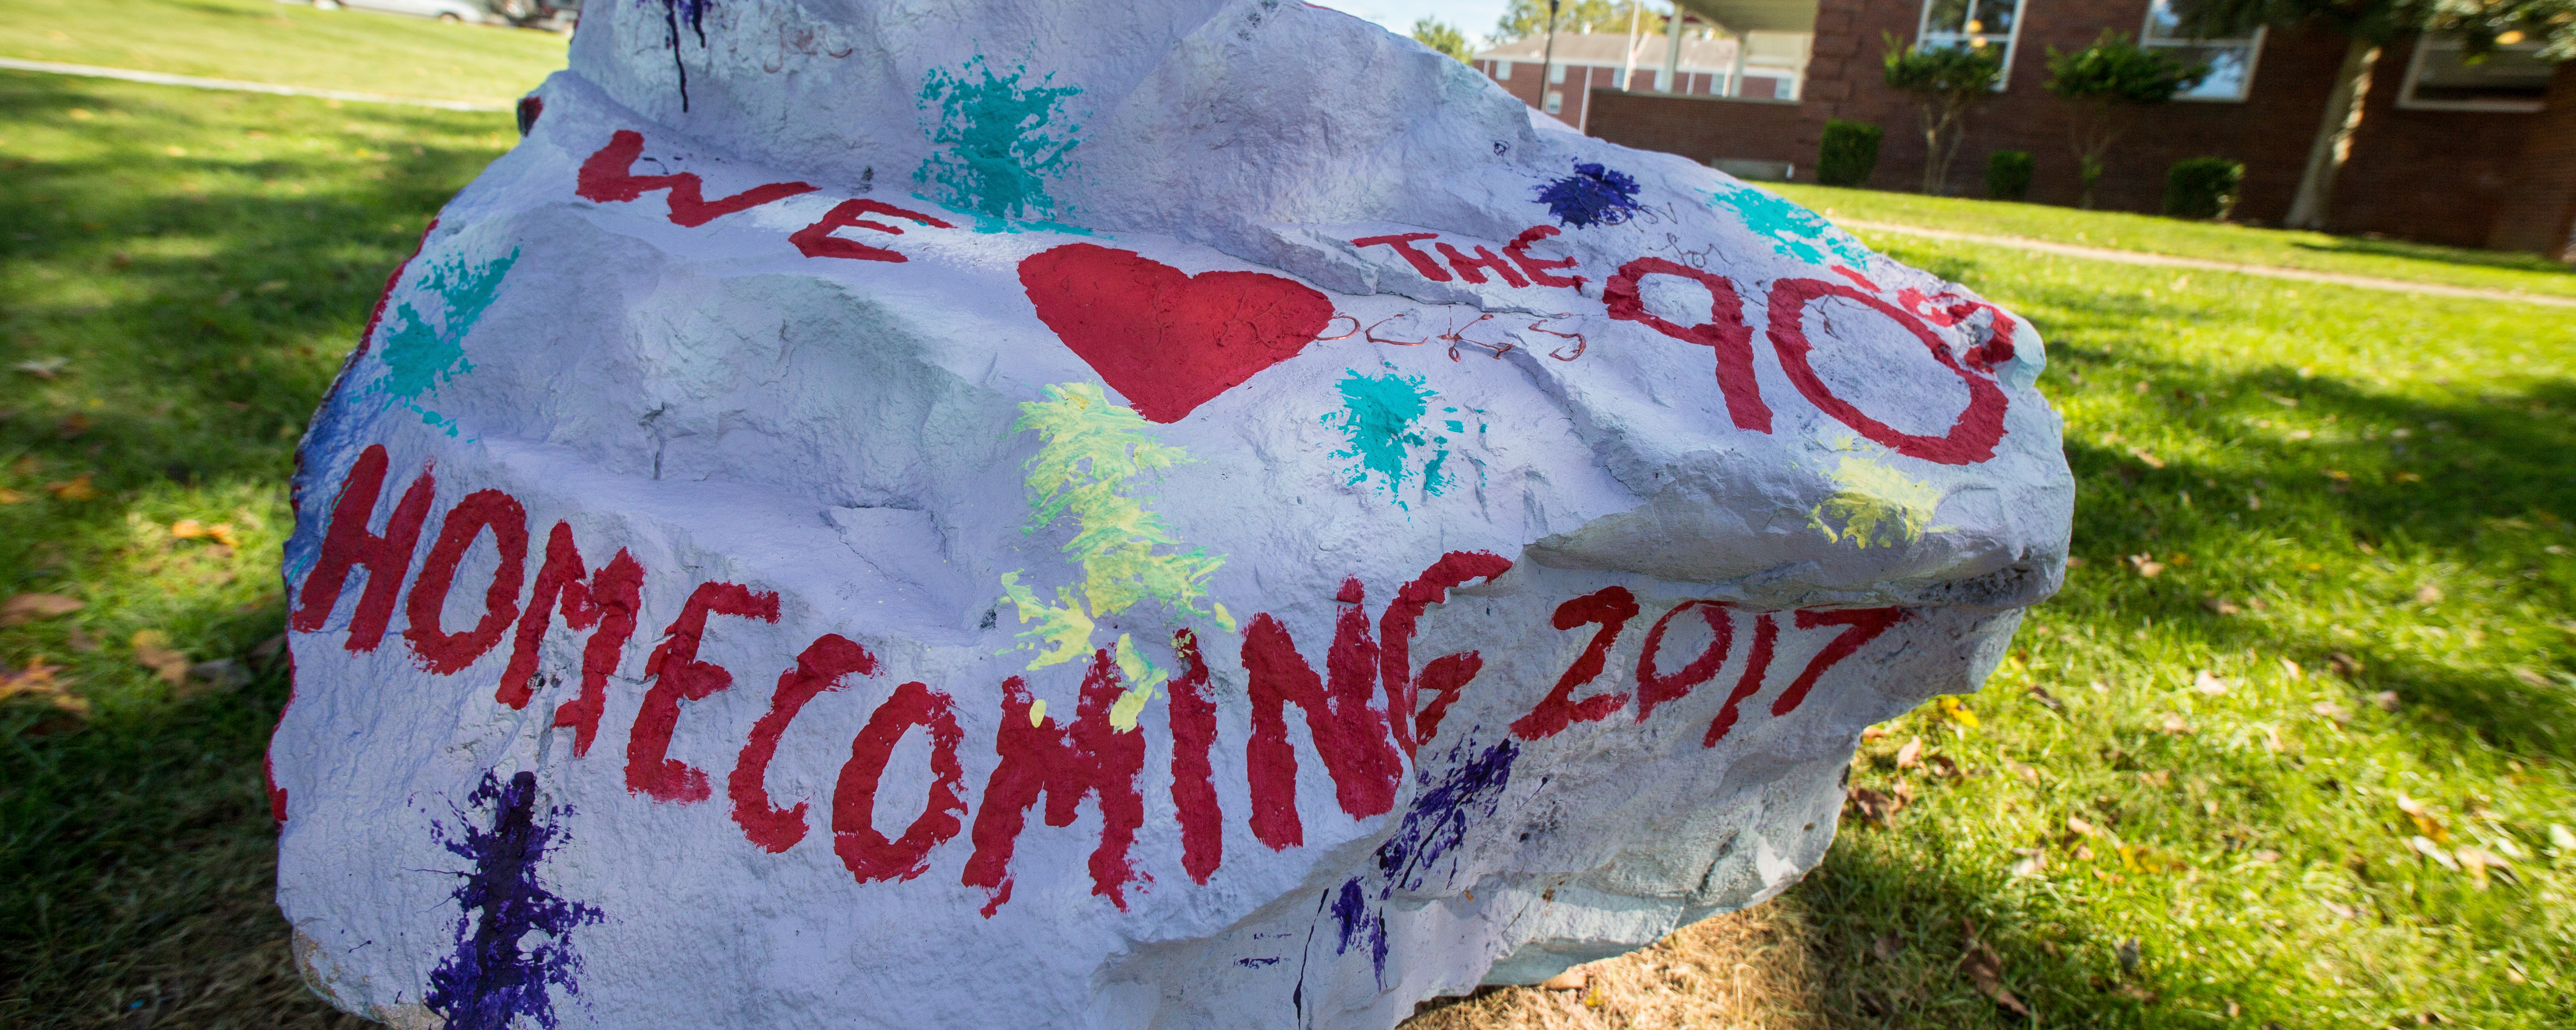 Spirit Rock painted for Homecoming 2017